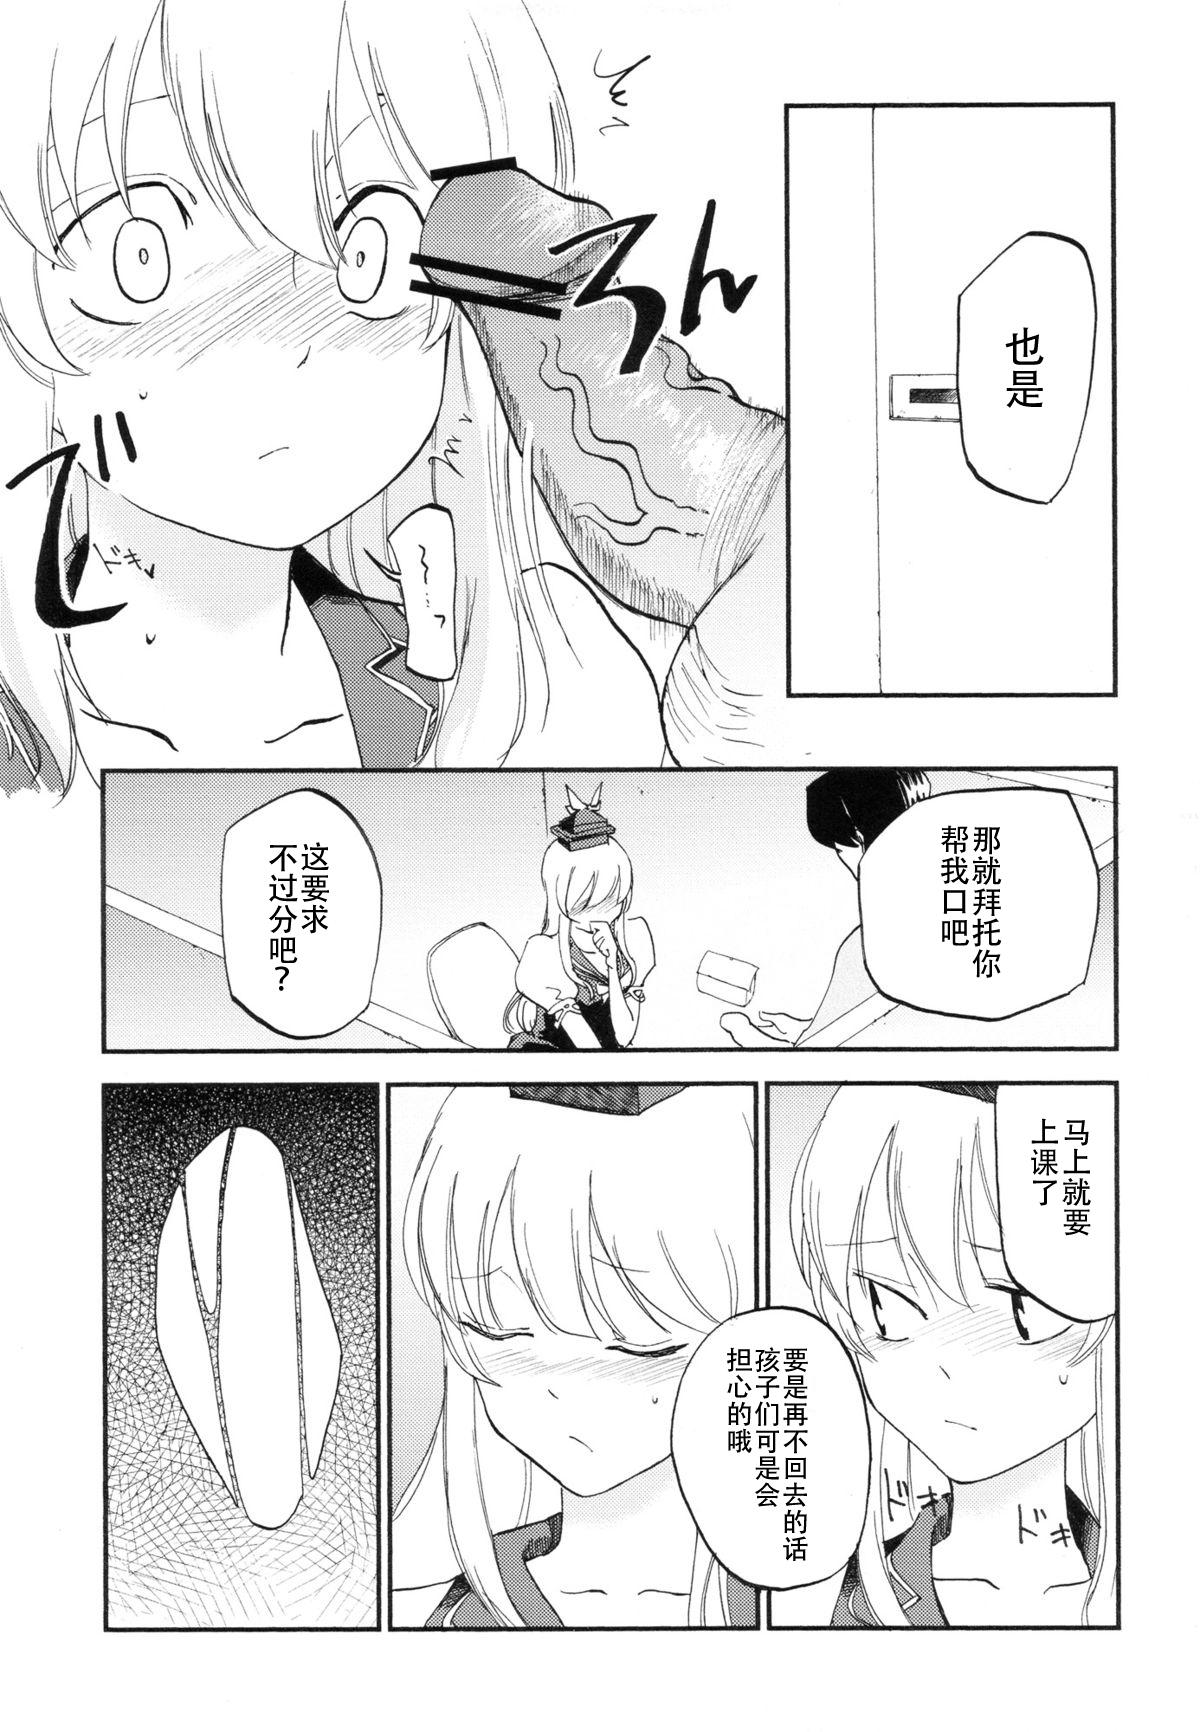 Doggie Style Porn NTR crisis - Touhou project Moan - Page 12